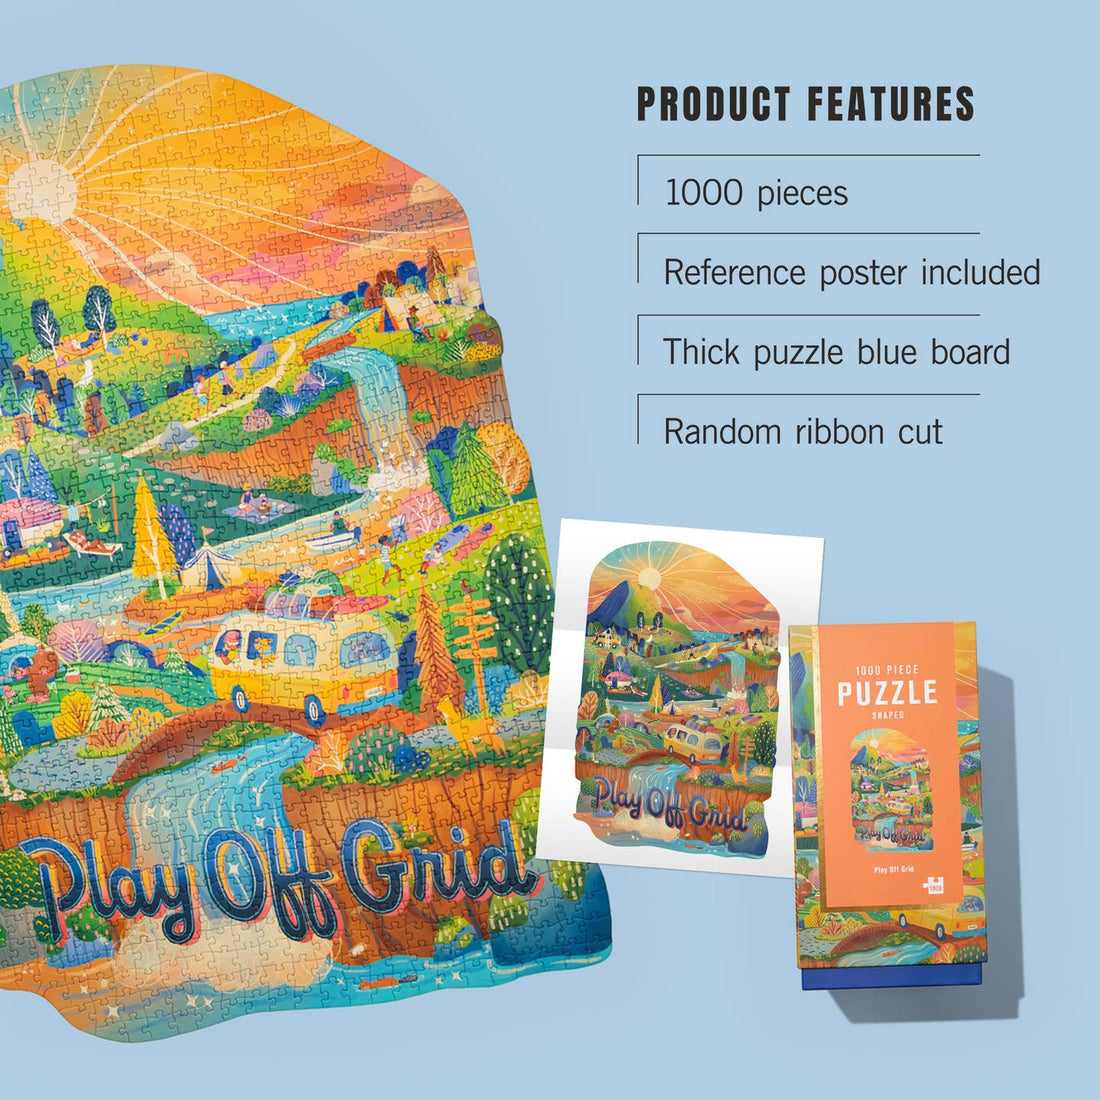 1000 Piece Puzzle, Play Off Grid, Firelight